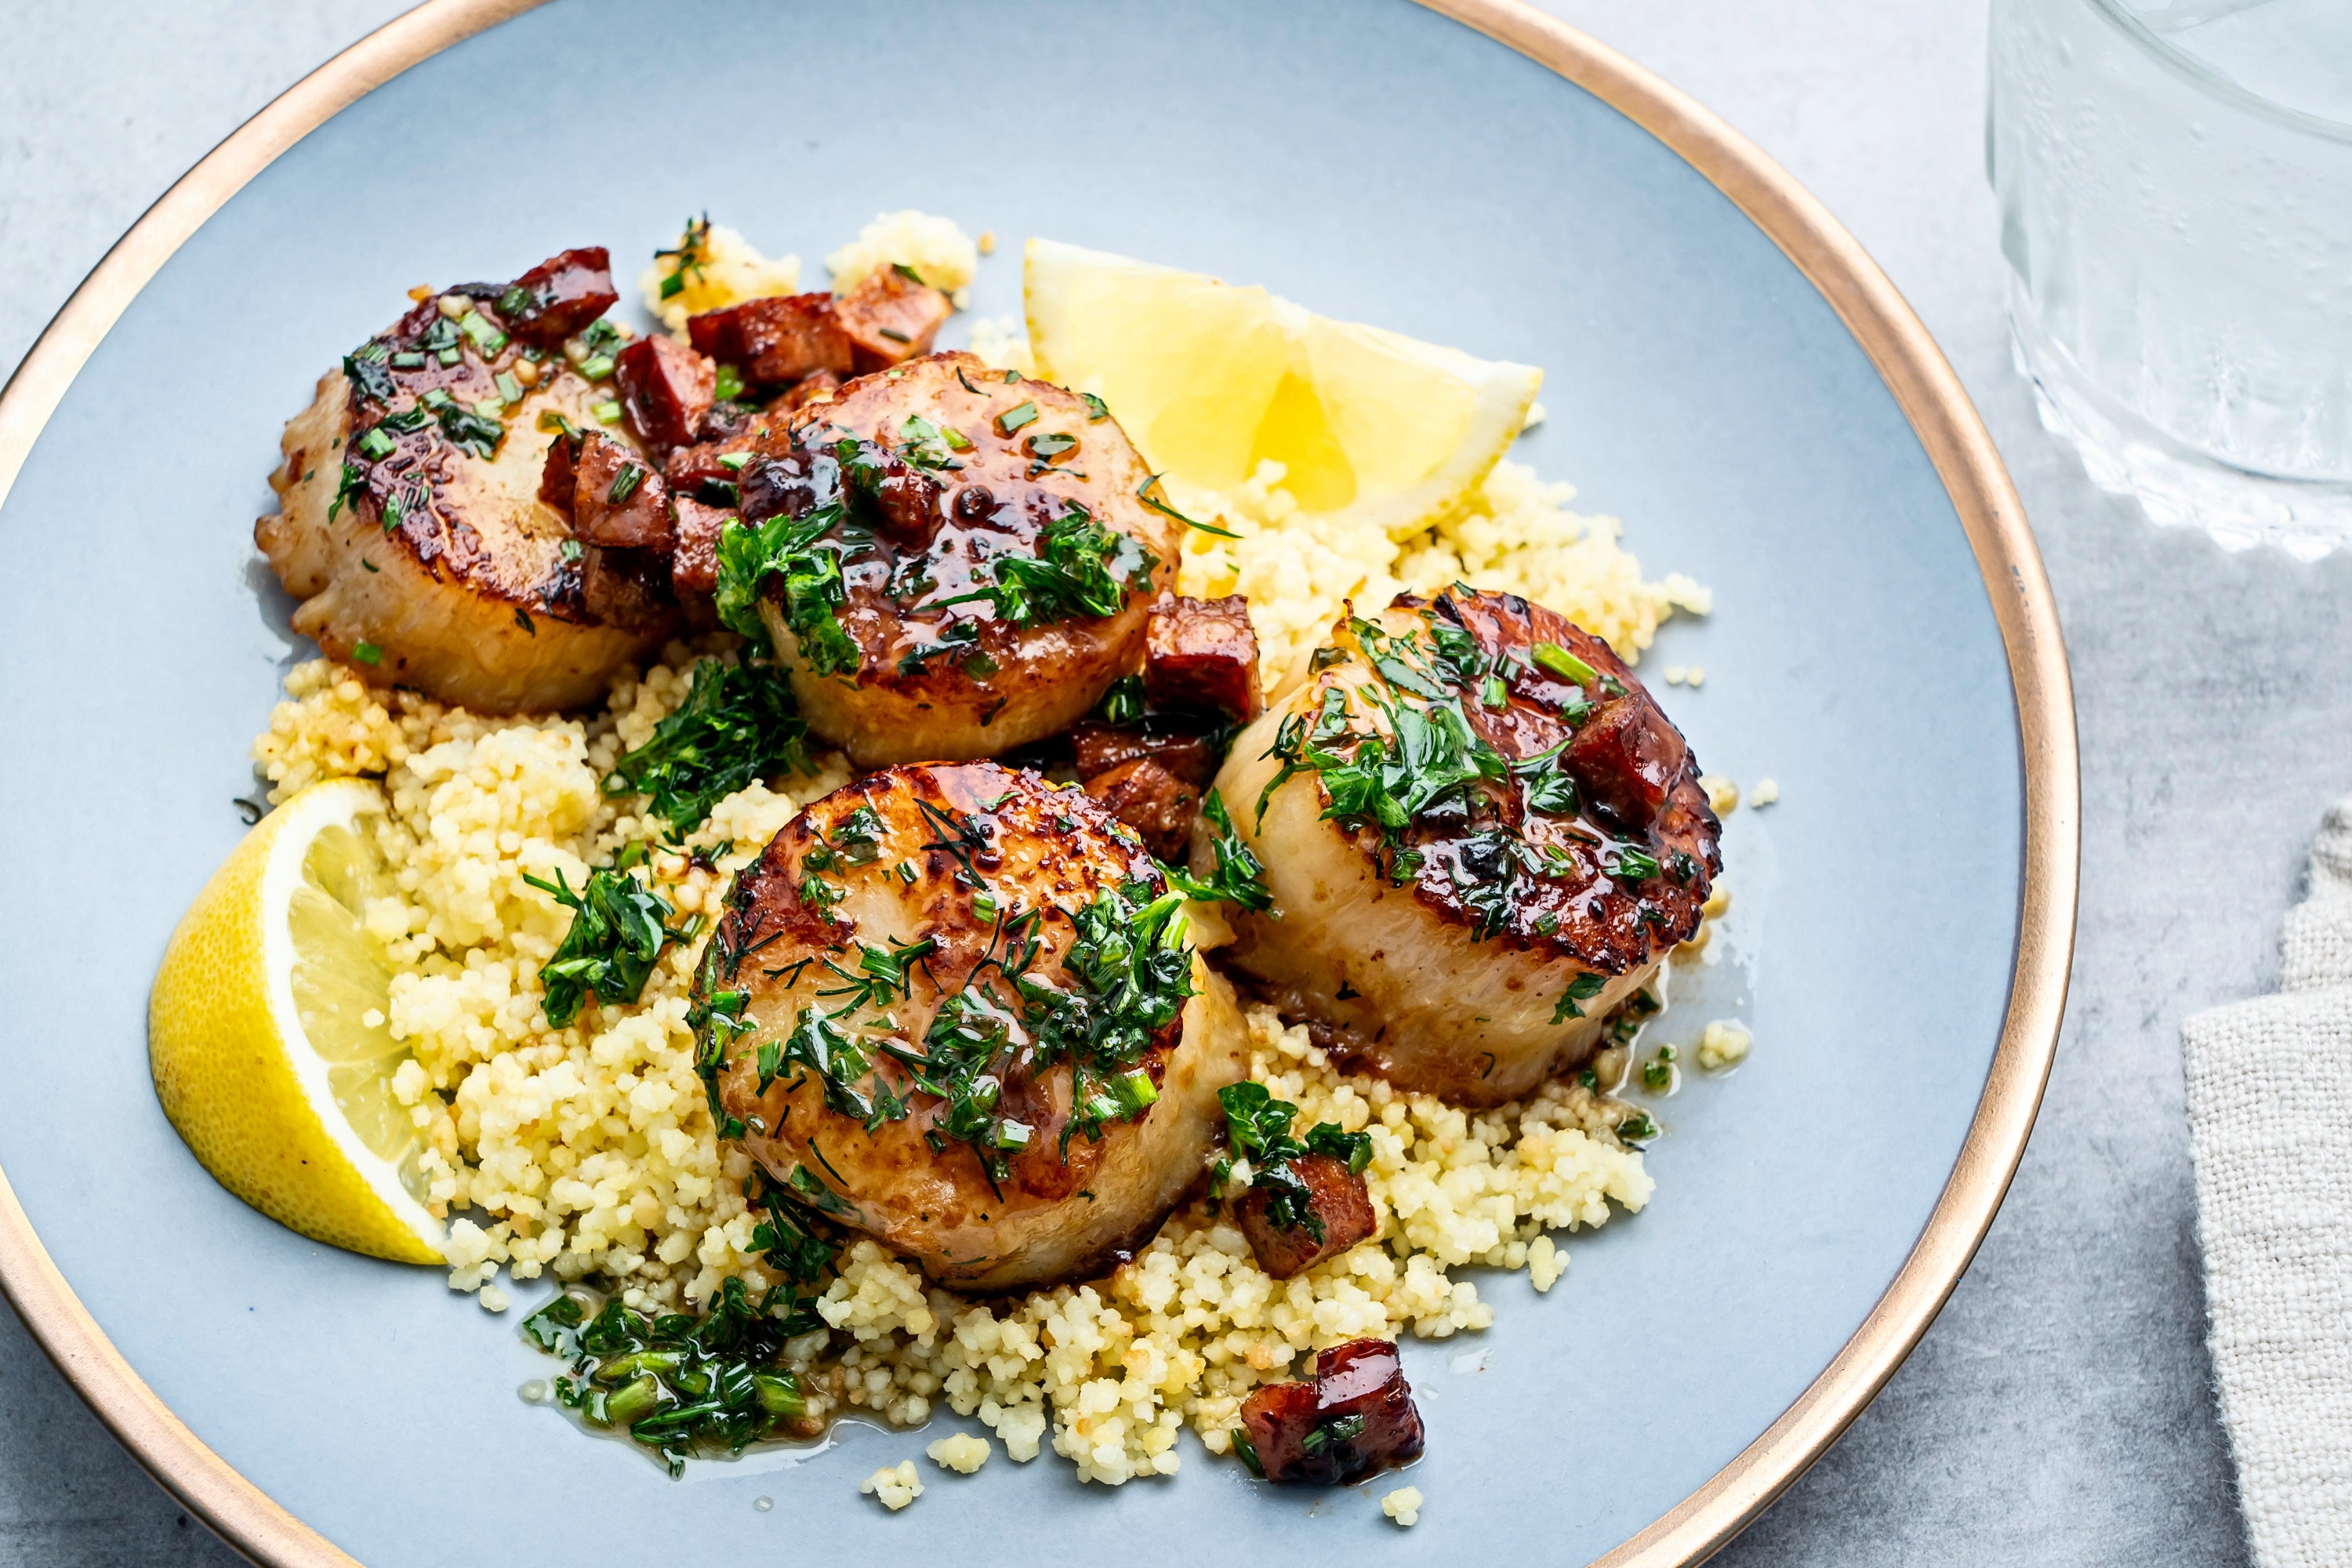 The chorizo-enhanced sauce is so flavourful even non-scallop lovers would likely be delighted